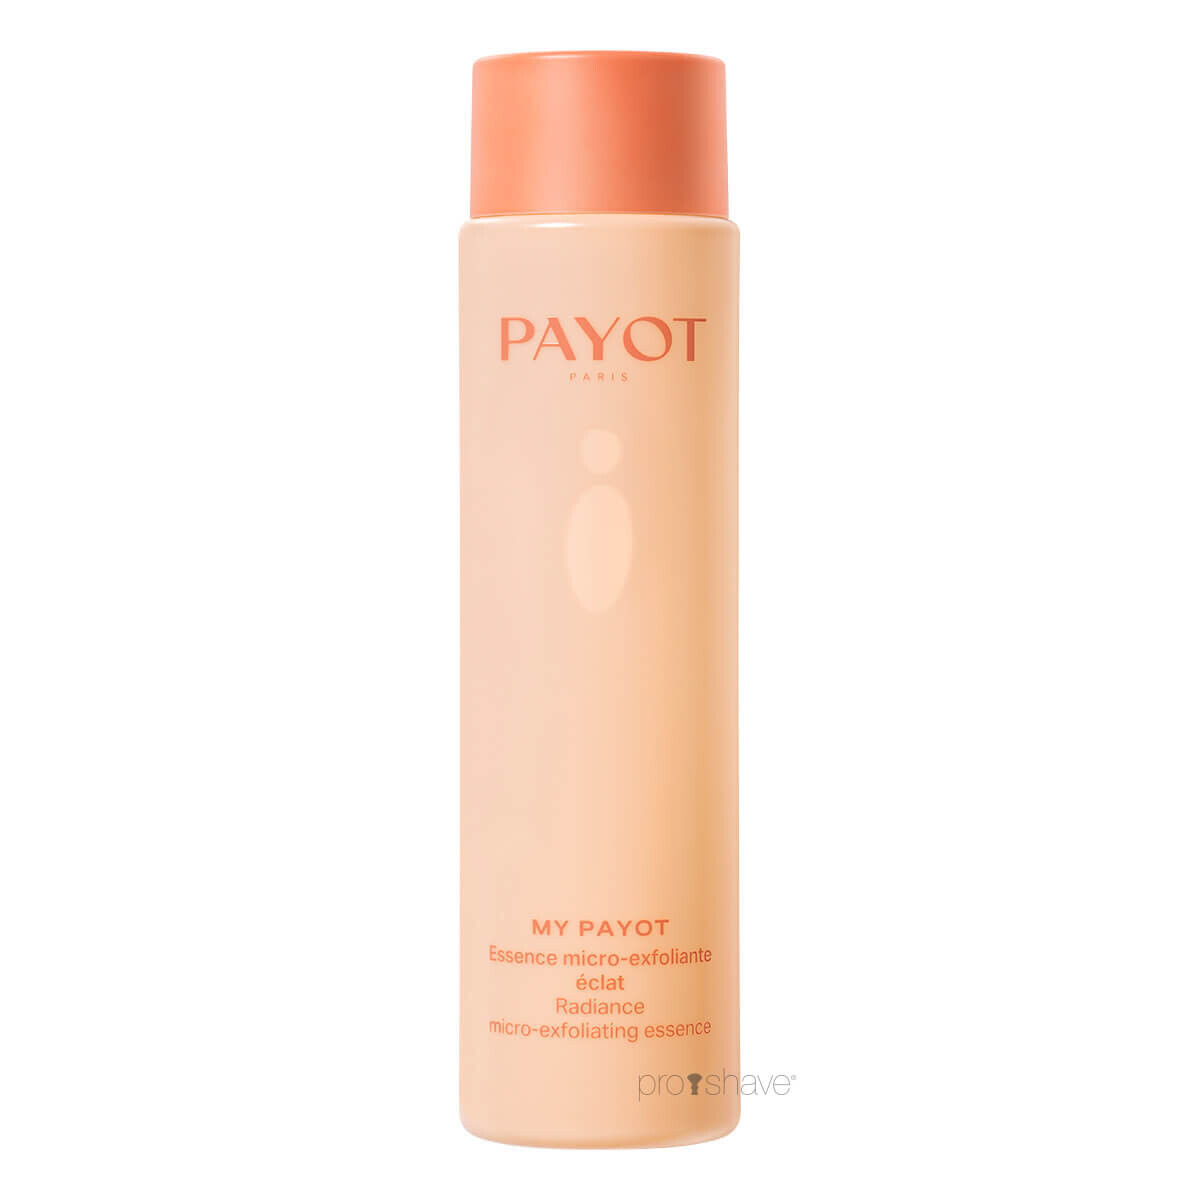 Billede af Payot My Payot Mico-exfoliating Essence, 125 ml.